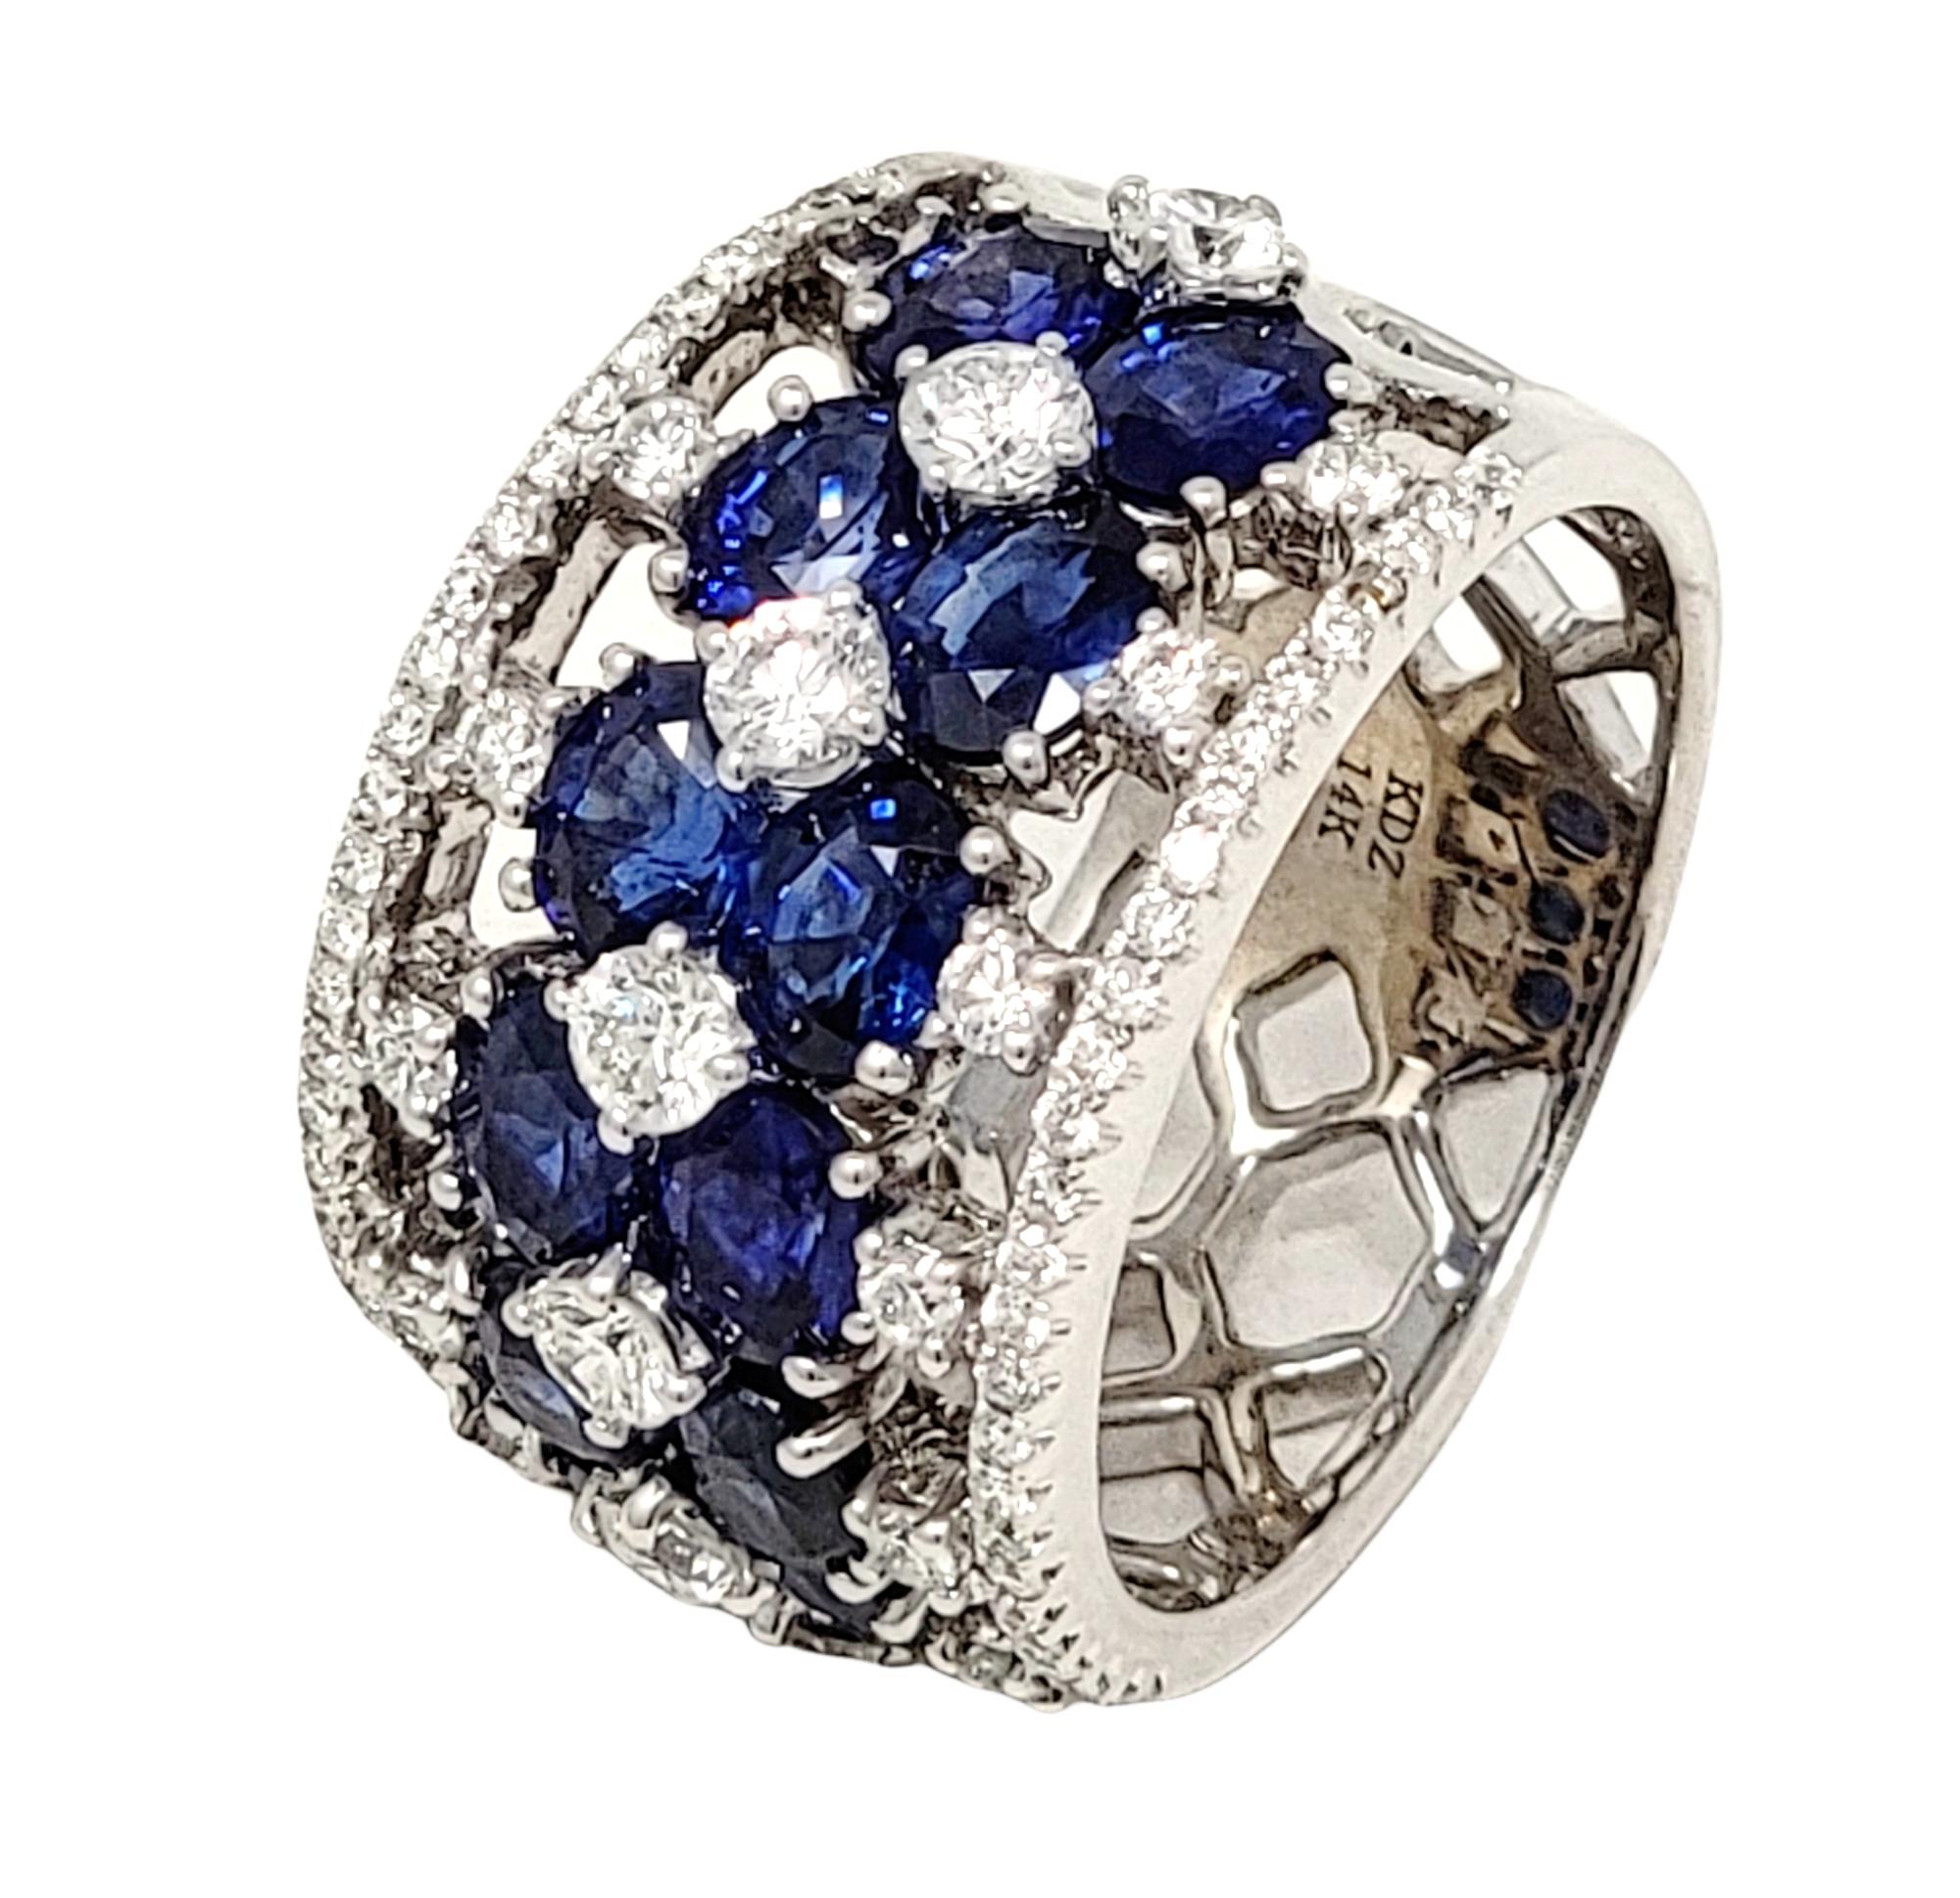 Multi Row Natural Blue Sapphire and Diamond Band Ring in 14 Karat White Gold In Excellent Condition For Sale In Scottsdale, AZ